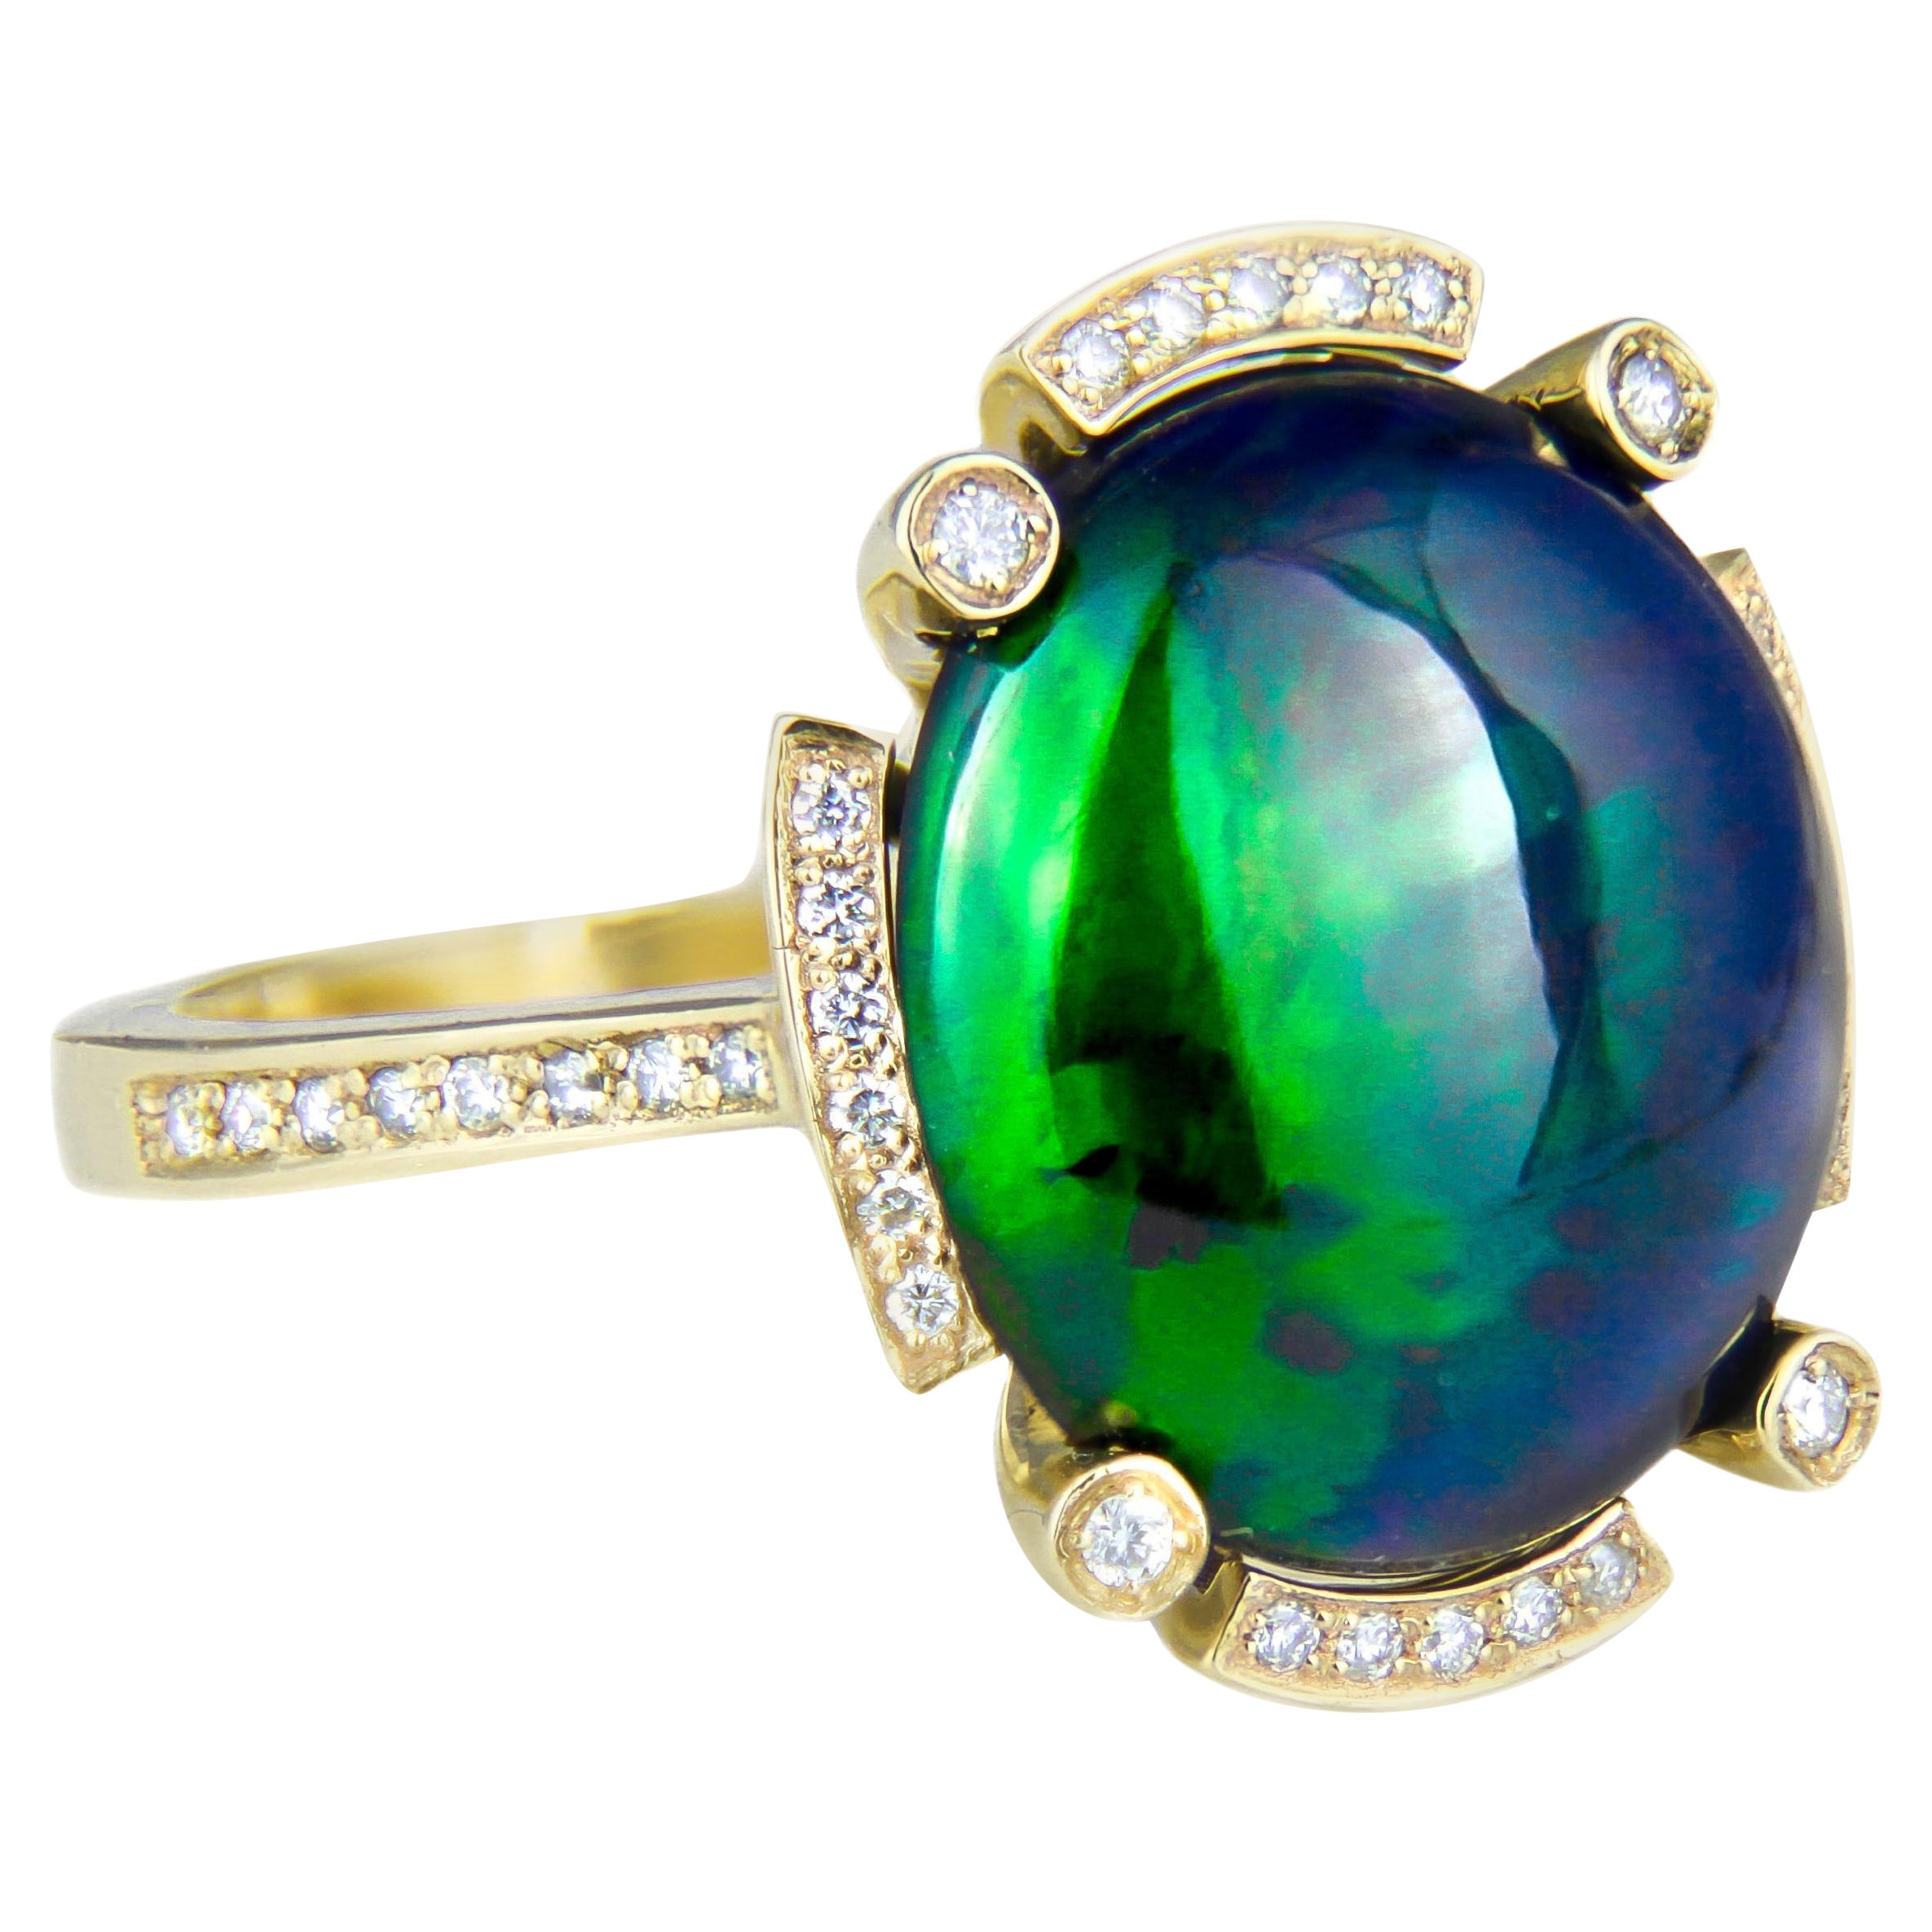 For Sale:  Black Opal and Diamonds Ring in 14k Gold. Gold Ring with Opal !